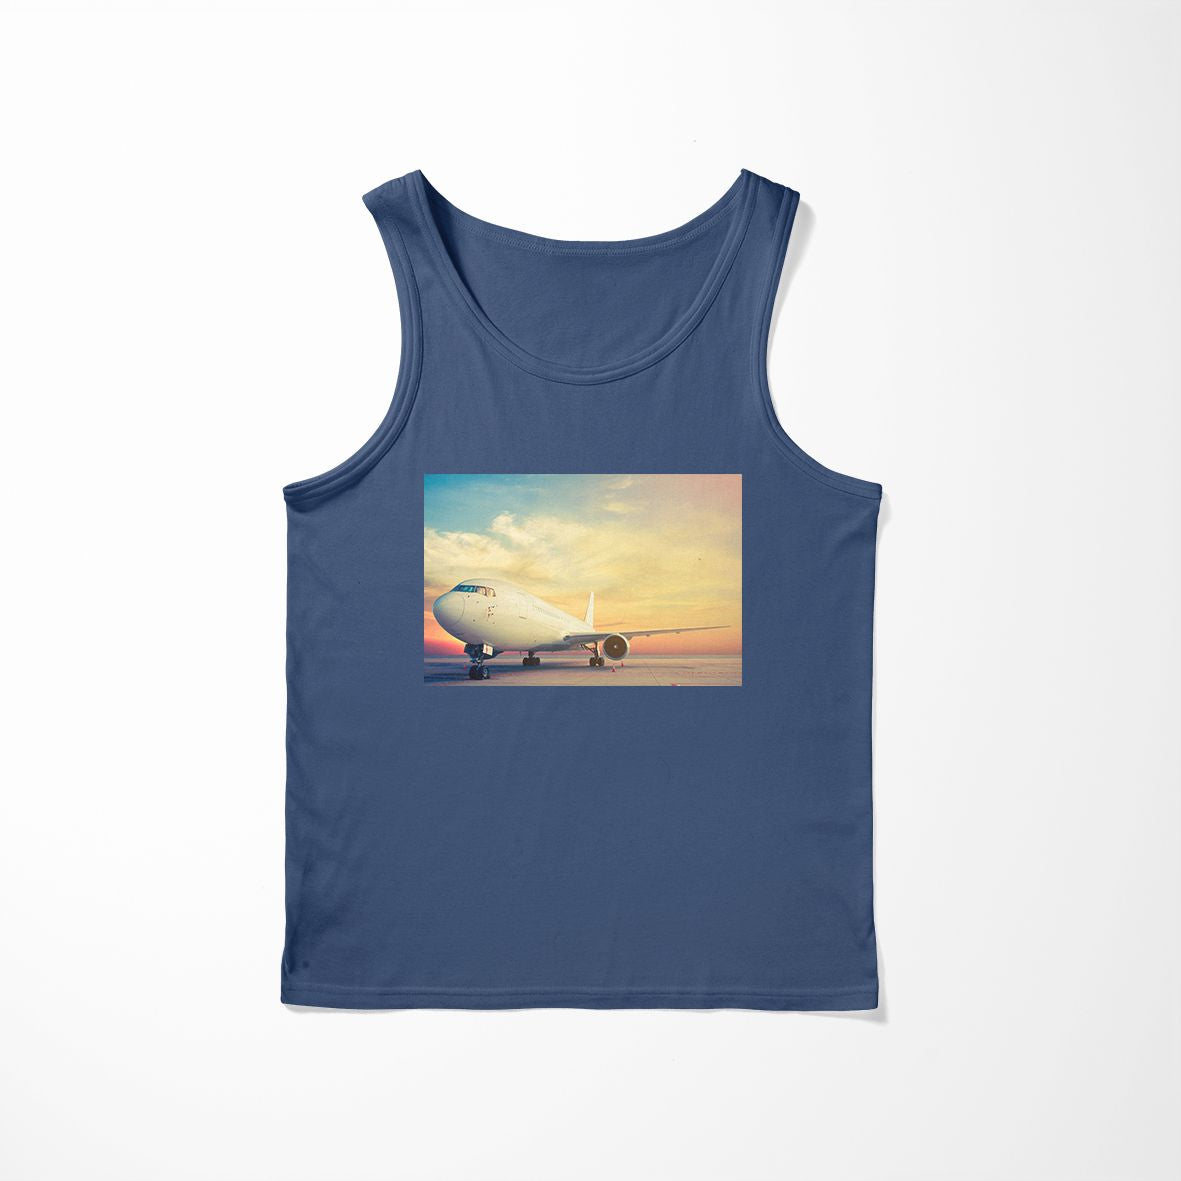 Parked Aircraft During Sunset Designed Tank Tops